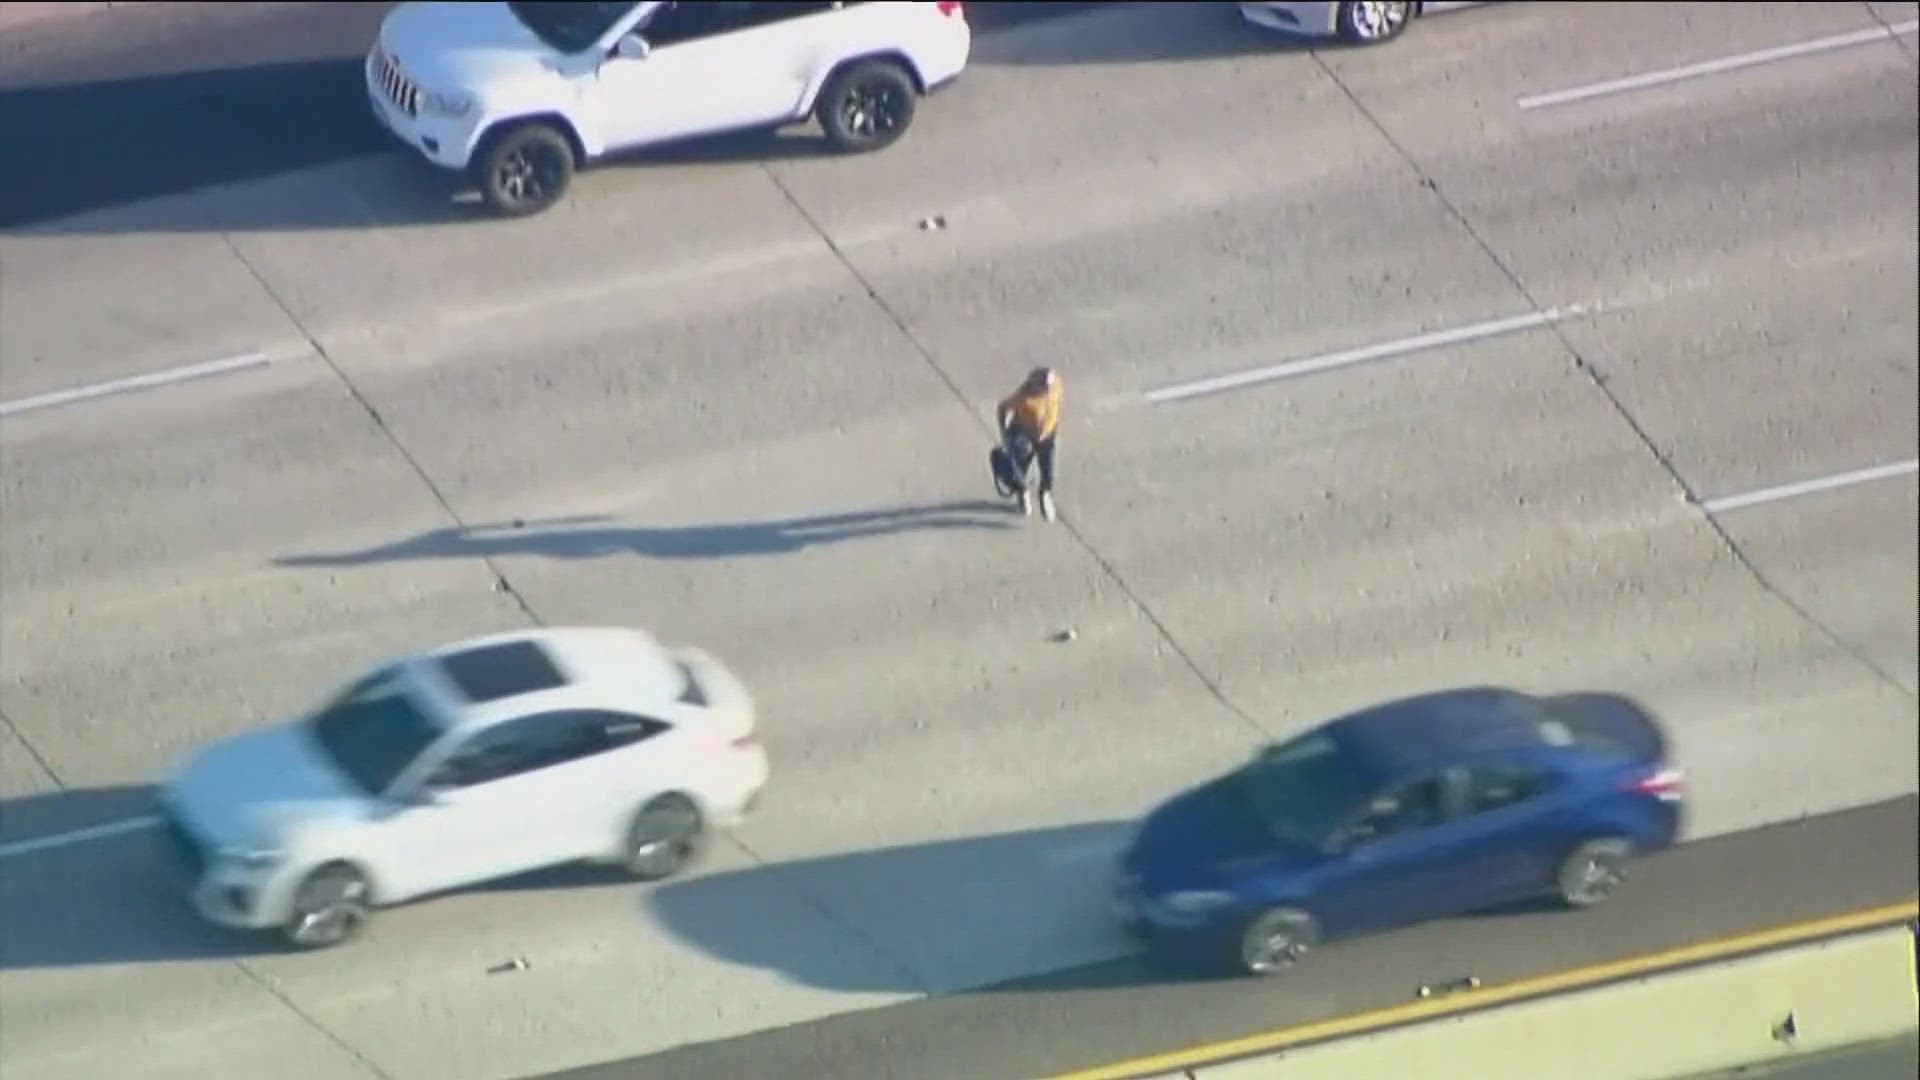 The pursuit started in La Jolla and continued in Pacific Beach before entering I-5 going southbound toward Downtown San Diego.